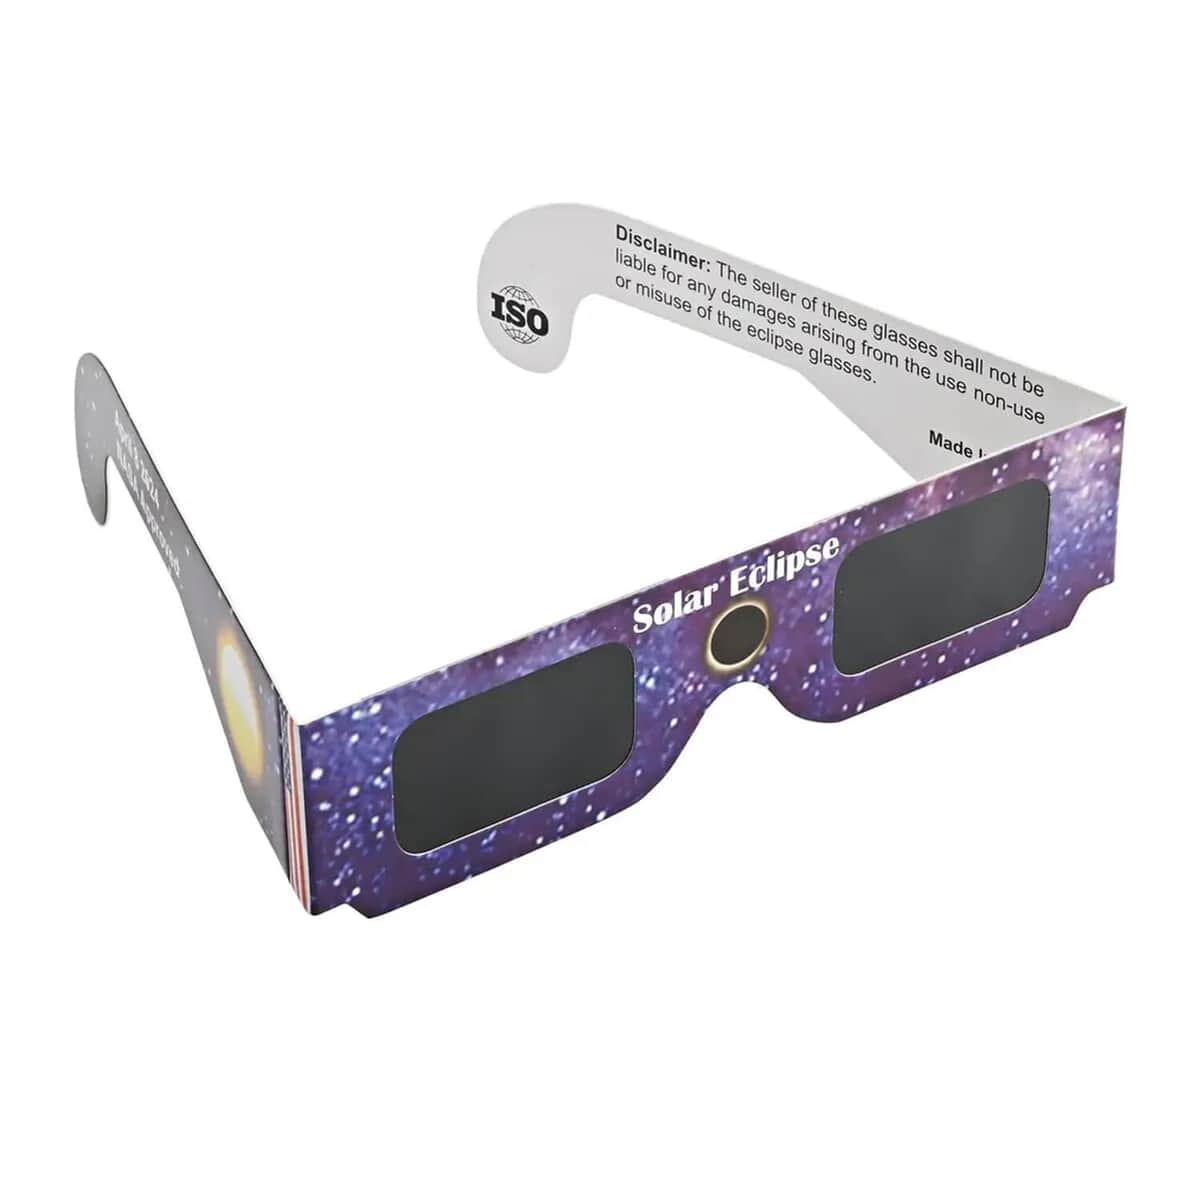 Set of 5 Solar Eclipse Viewing Glasses, Safe Shades for Direct Sun Viewing image number 7